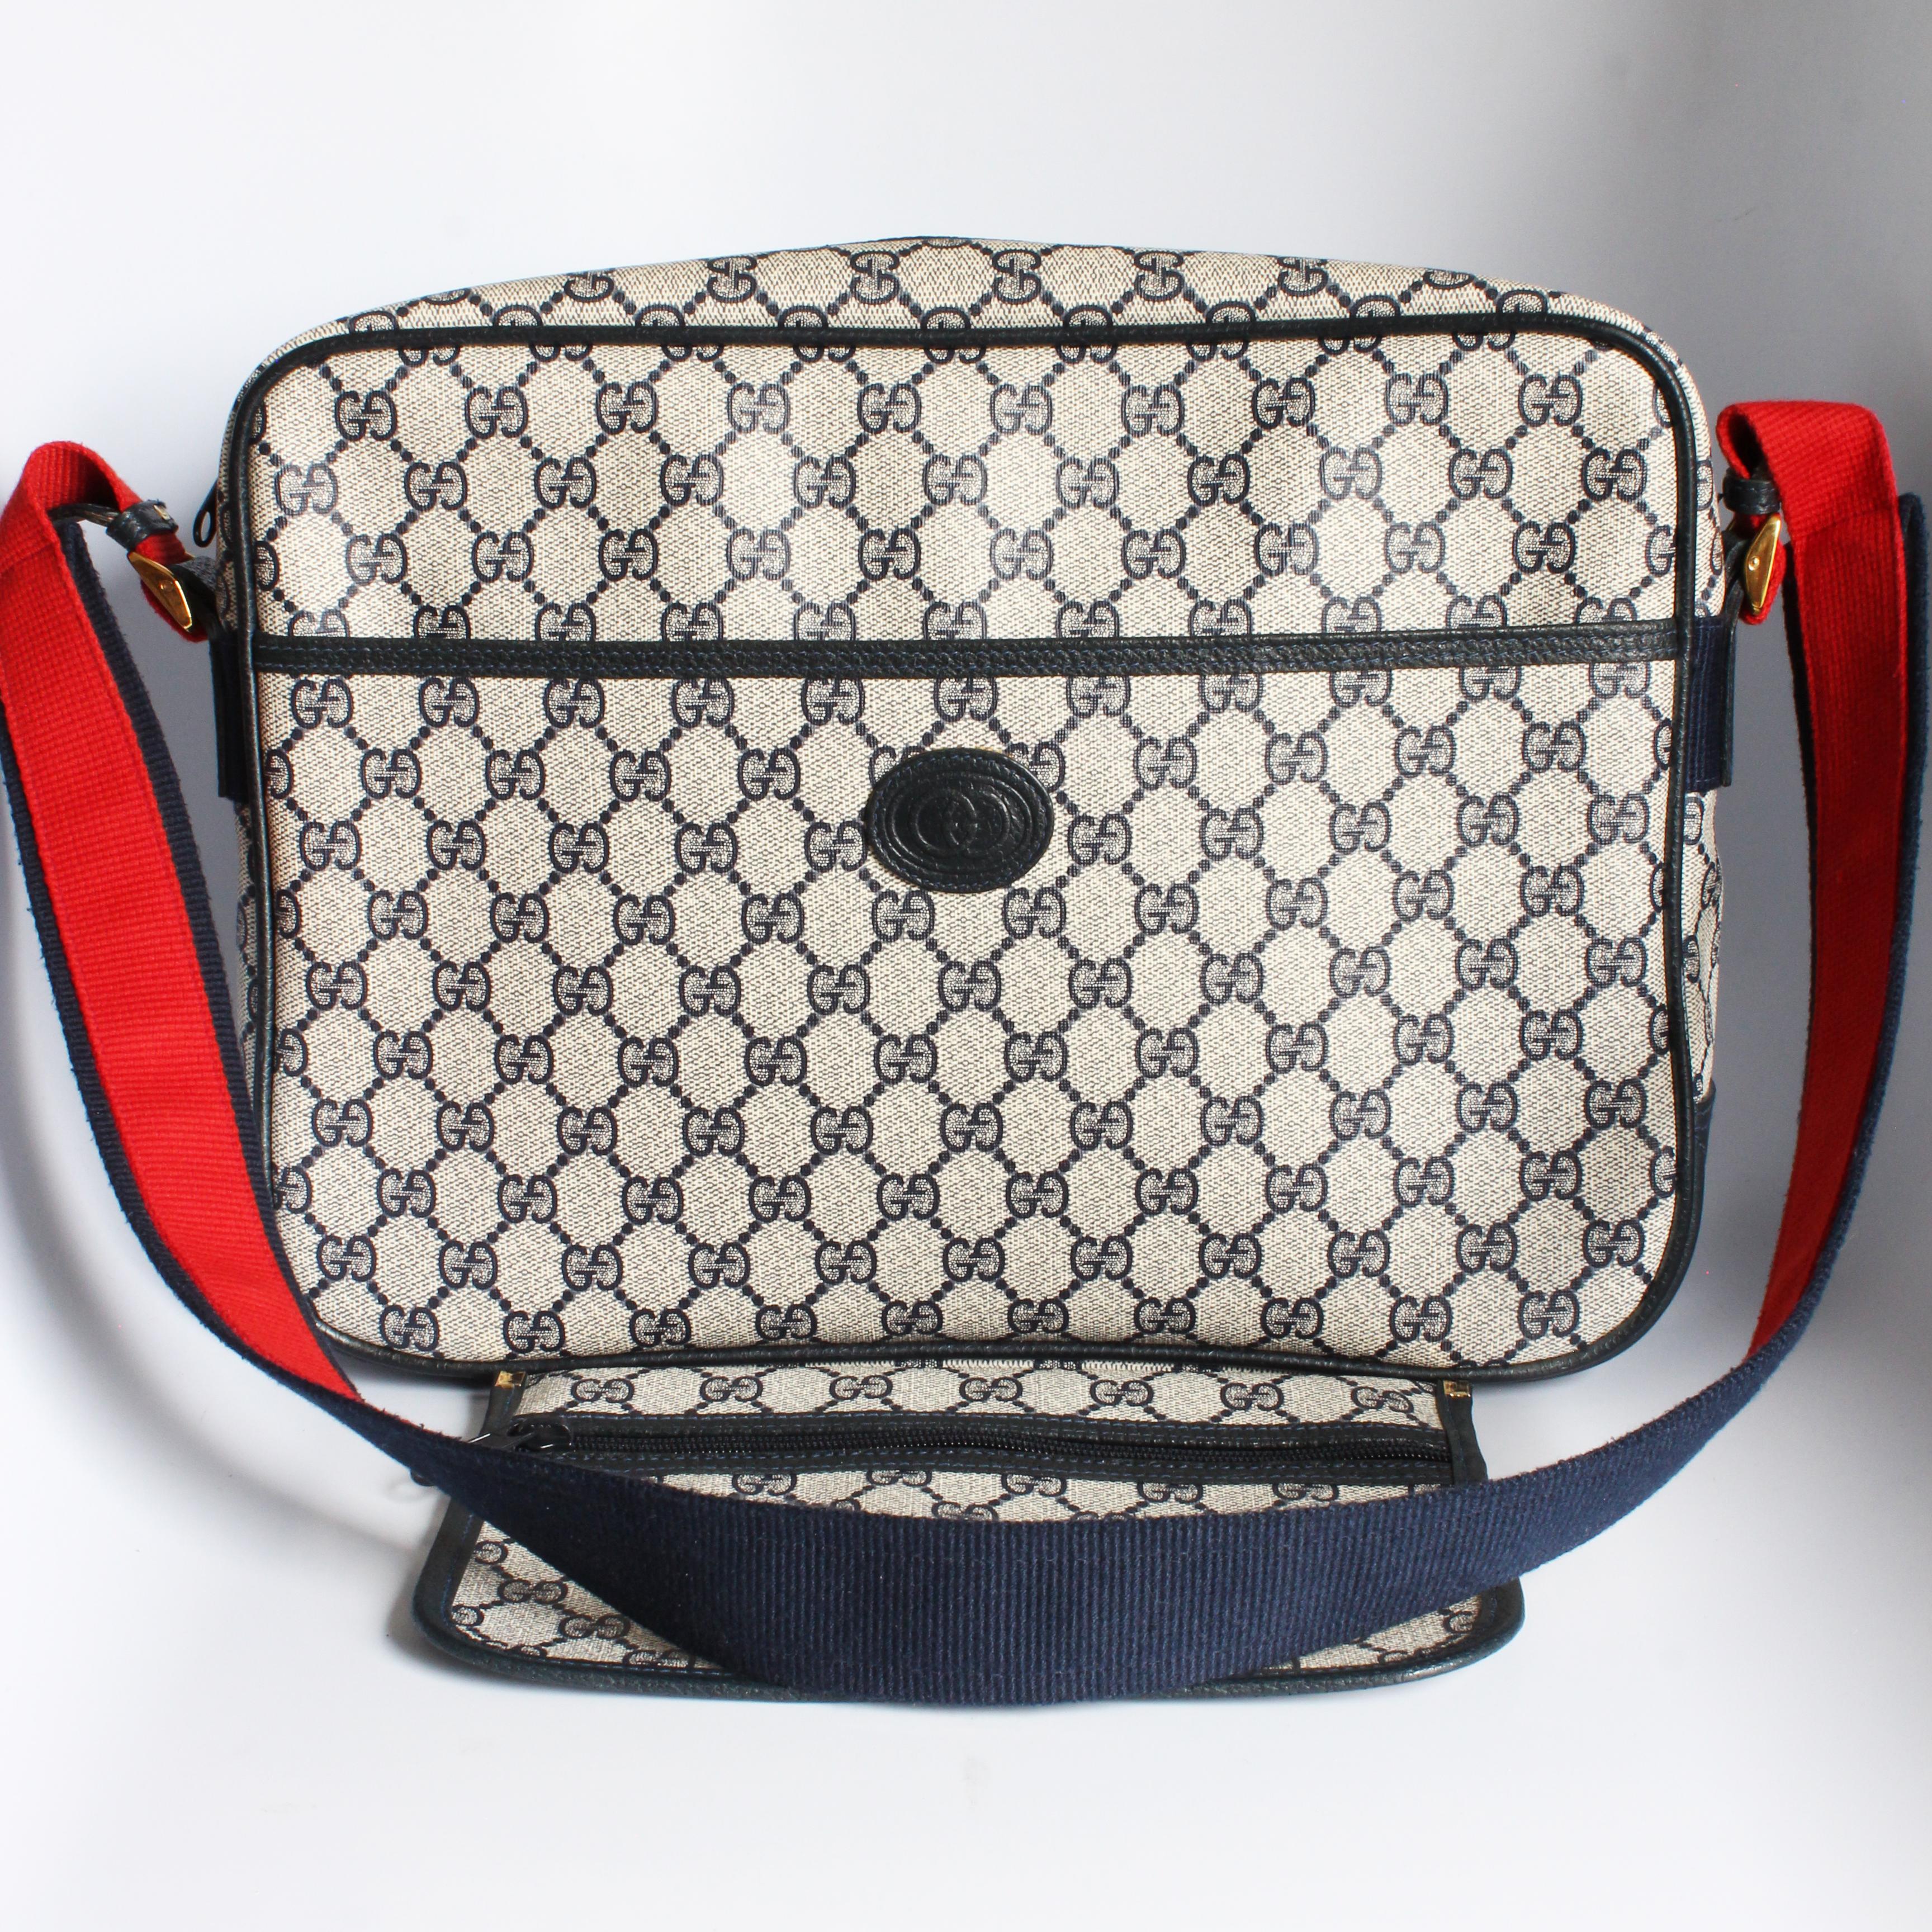 Gucci GG Plus Messenger Bag Travel Carry On with Removable Pouch Navy Vintage In Good Condition For Sale In Port Saint Lucie, FL